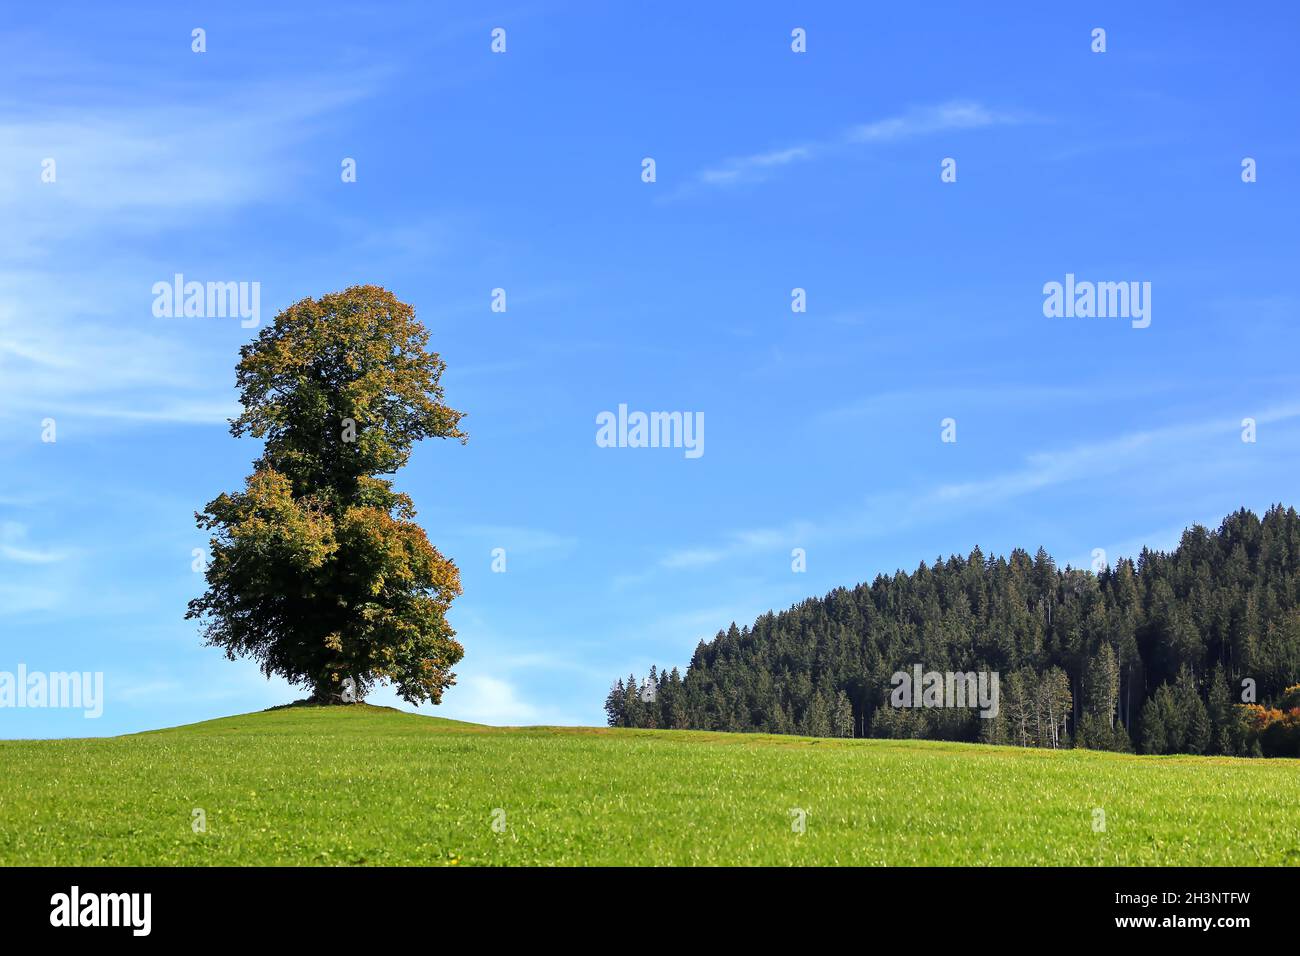 Detached tree on the green hill Stock Photo